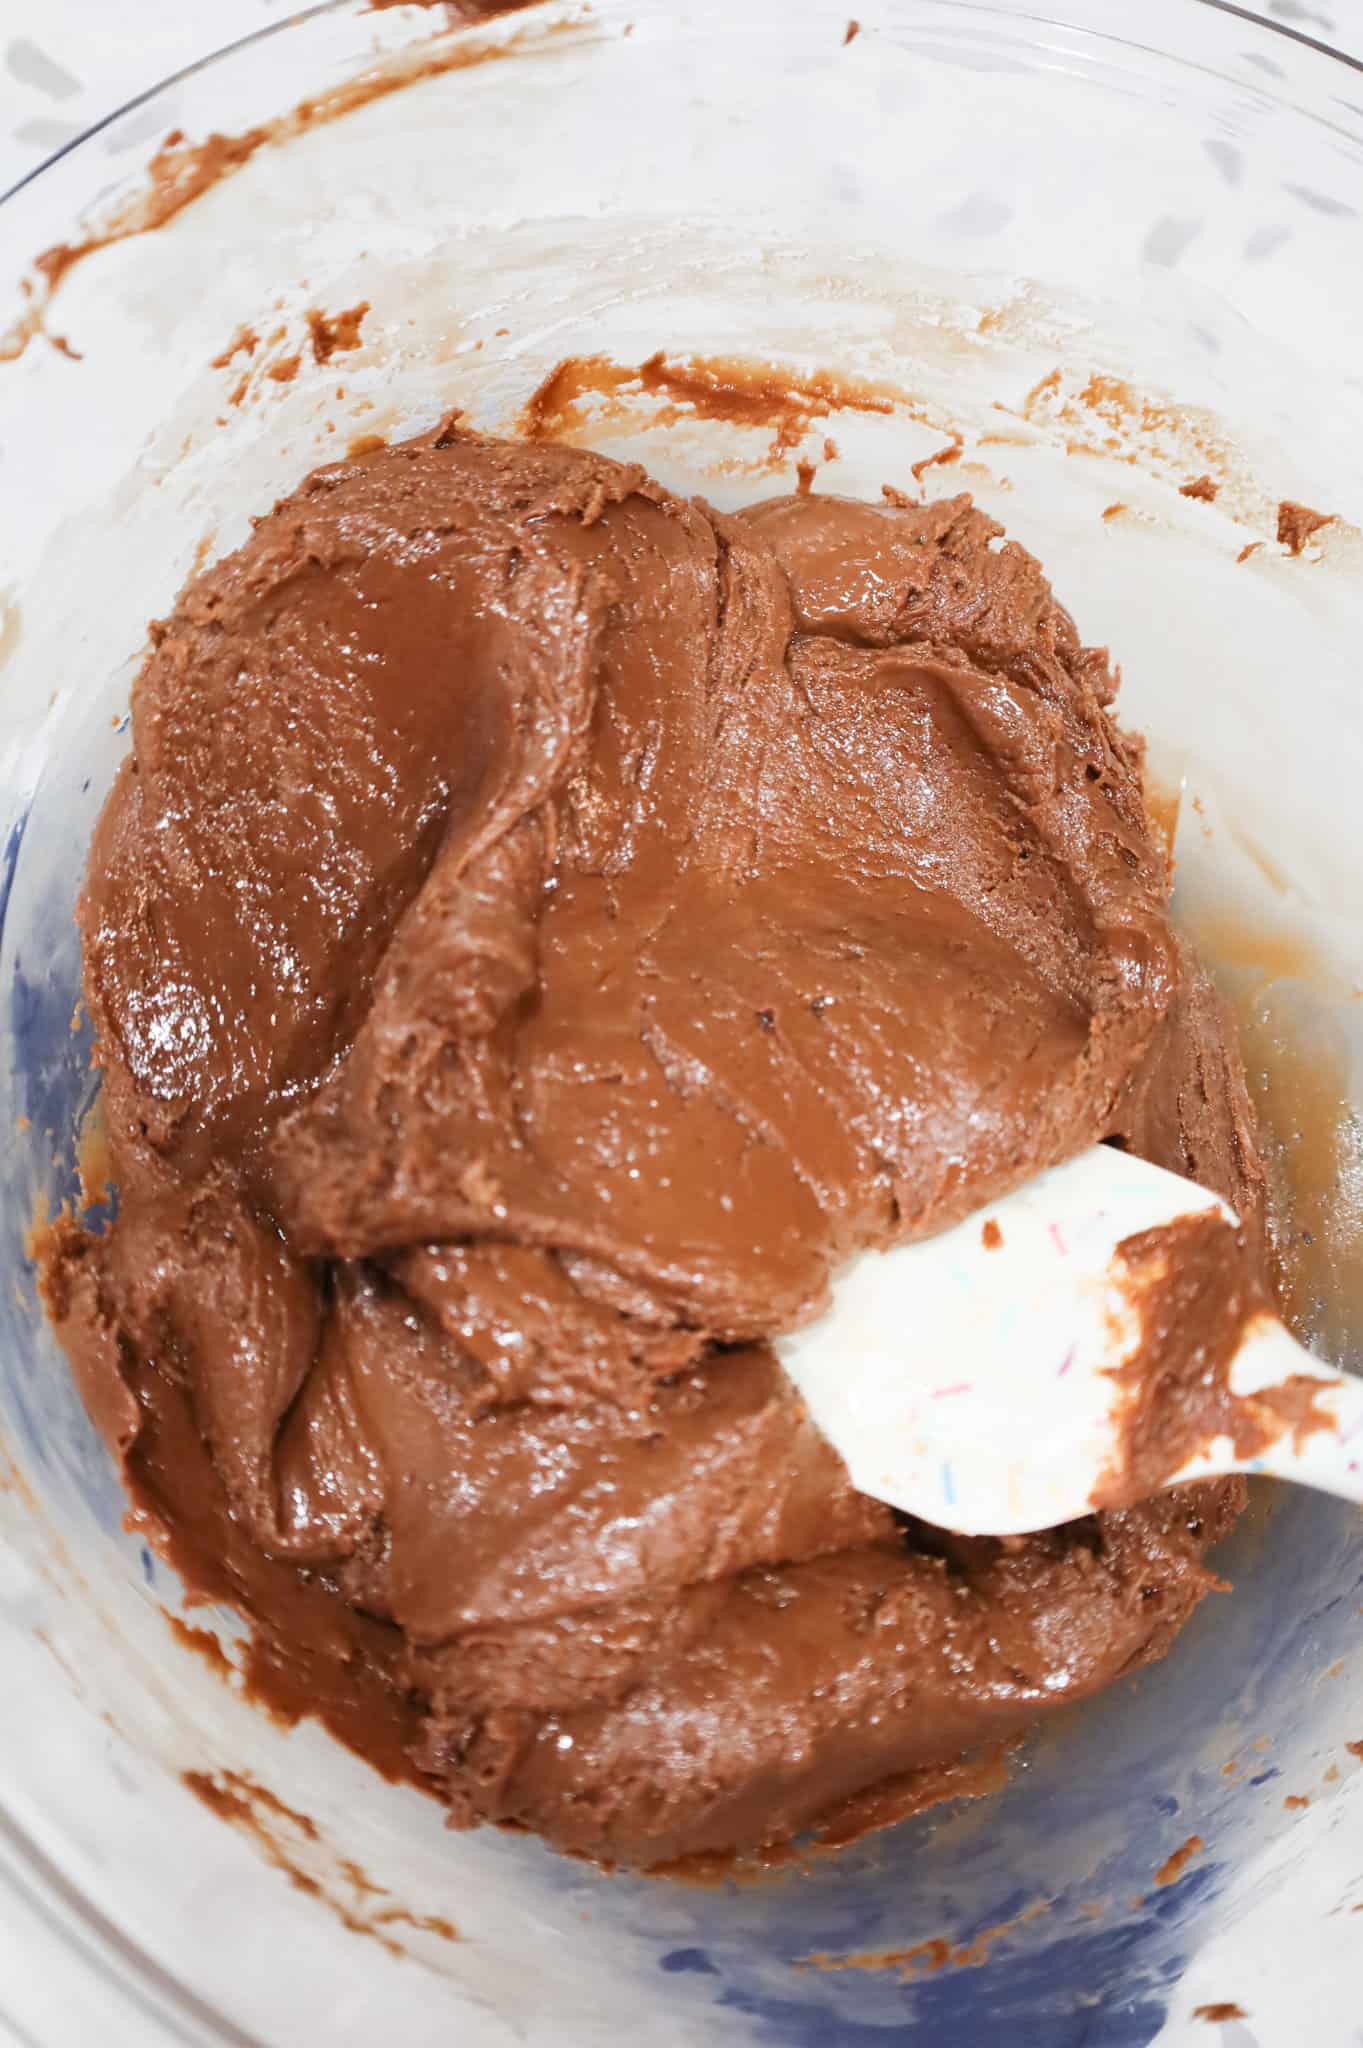 milk chocolate chips and condensed milk mixture in a bowl